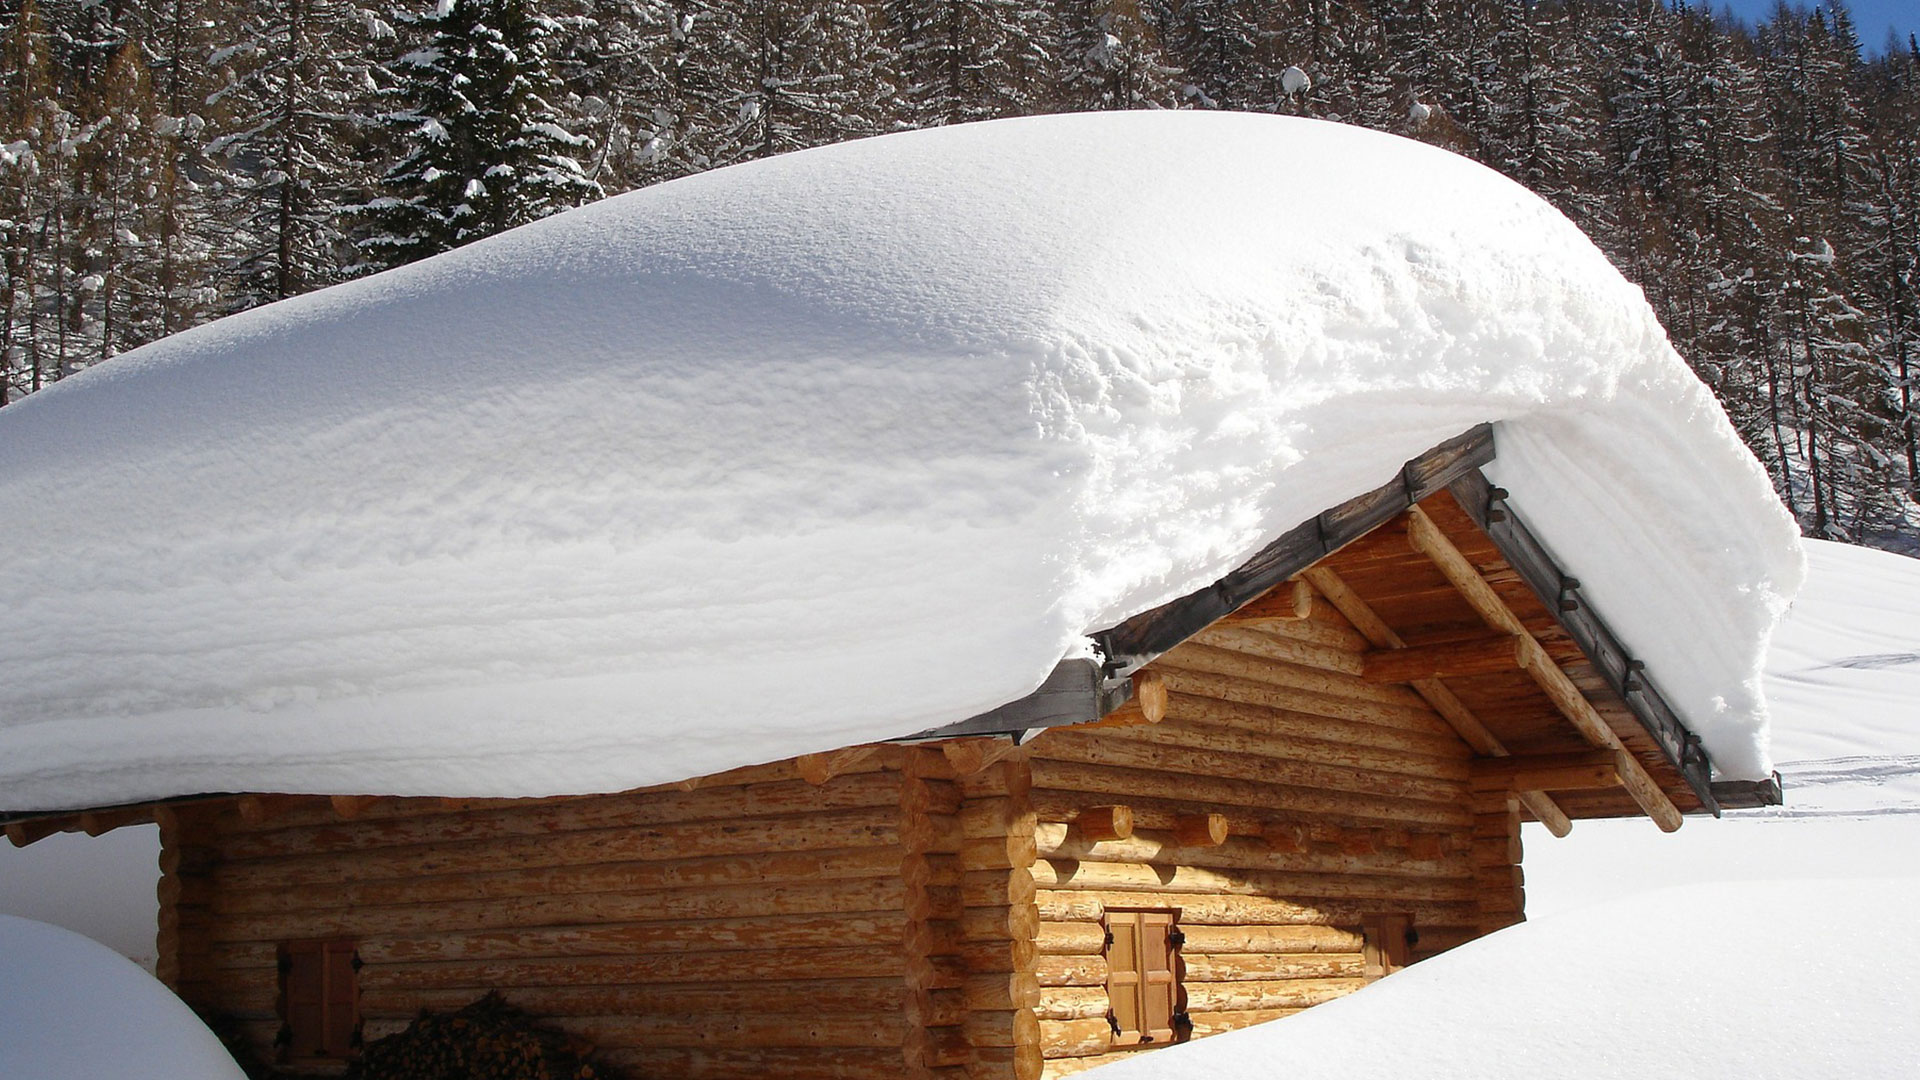 Large Amount of Snow on Cabin Roof